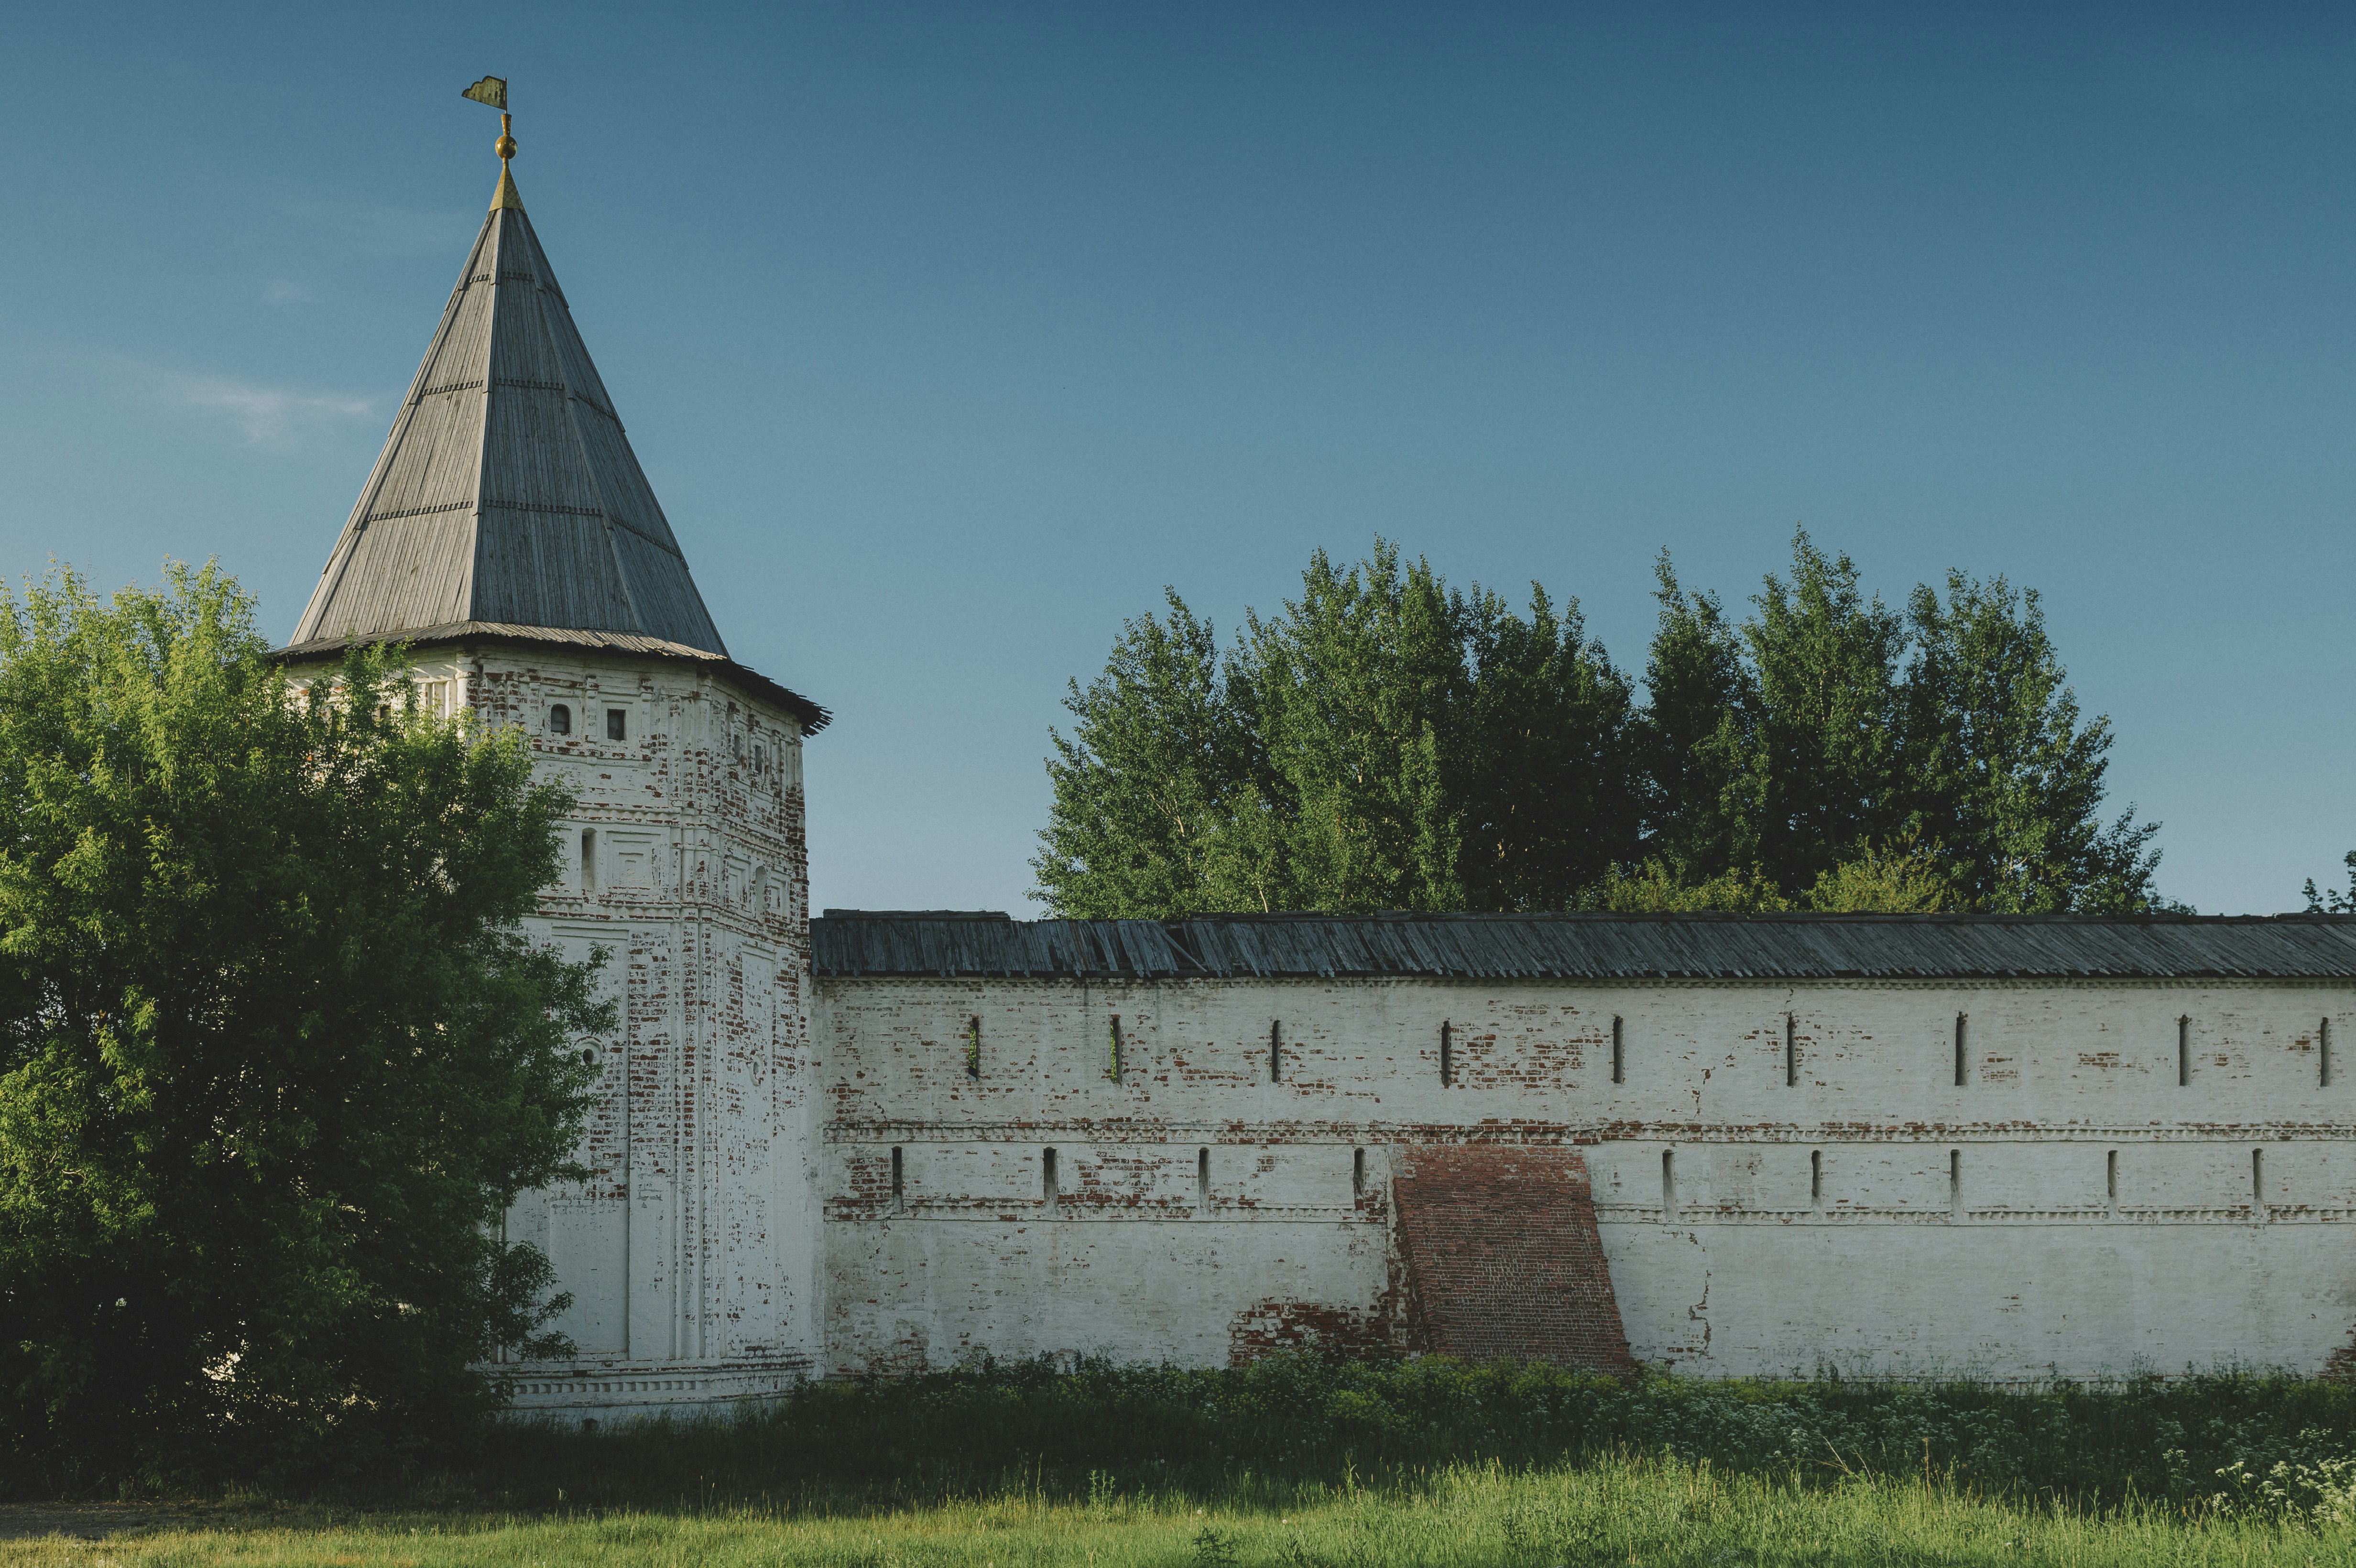 Wall and tower of the Orthodox Goritsky Monastery in Pereslavl-Zalessky.